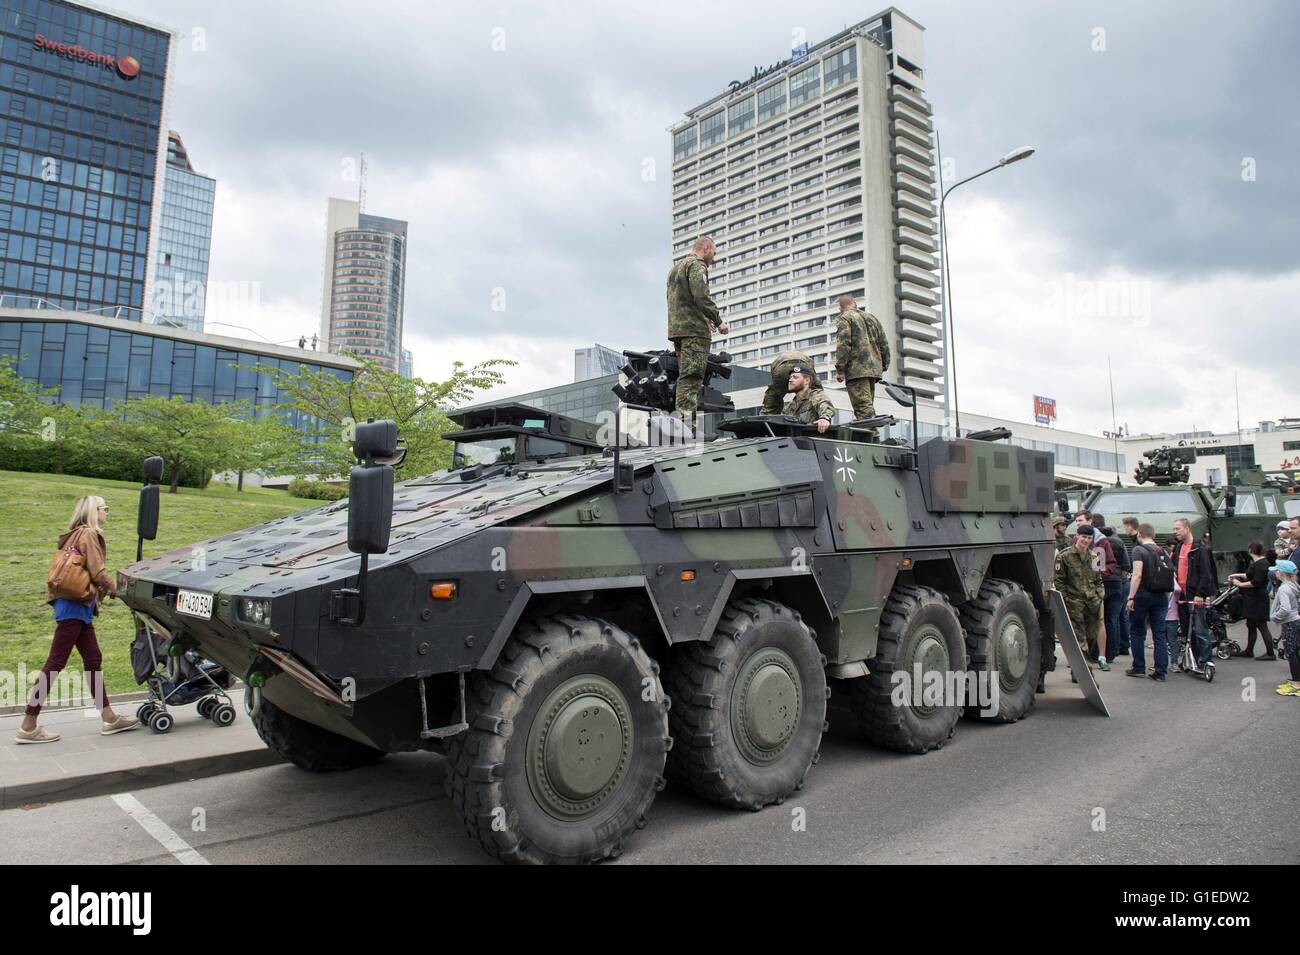 Vilnius, Lithuania. 14th May, 2016. People are viewing the military vehicles in Vilnius, Lithuania, May 14, 2016. Lithuania celebrates Armed Forces and Public Unity Day in it's captial on Saturday. Troops of Lithuania, Germany, U.S., Luxembourg, Portugal, etc. brought their light weapons, military vehicles and other equipment to the public. Fighting Falcon F-16 of Portuguese air force and Black Hawk of the U.S. air force participated in the performance. Credit:  Alfredas Pliadis/Xinhua/Alamy Live News Stock Photo